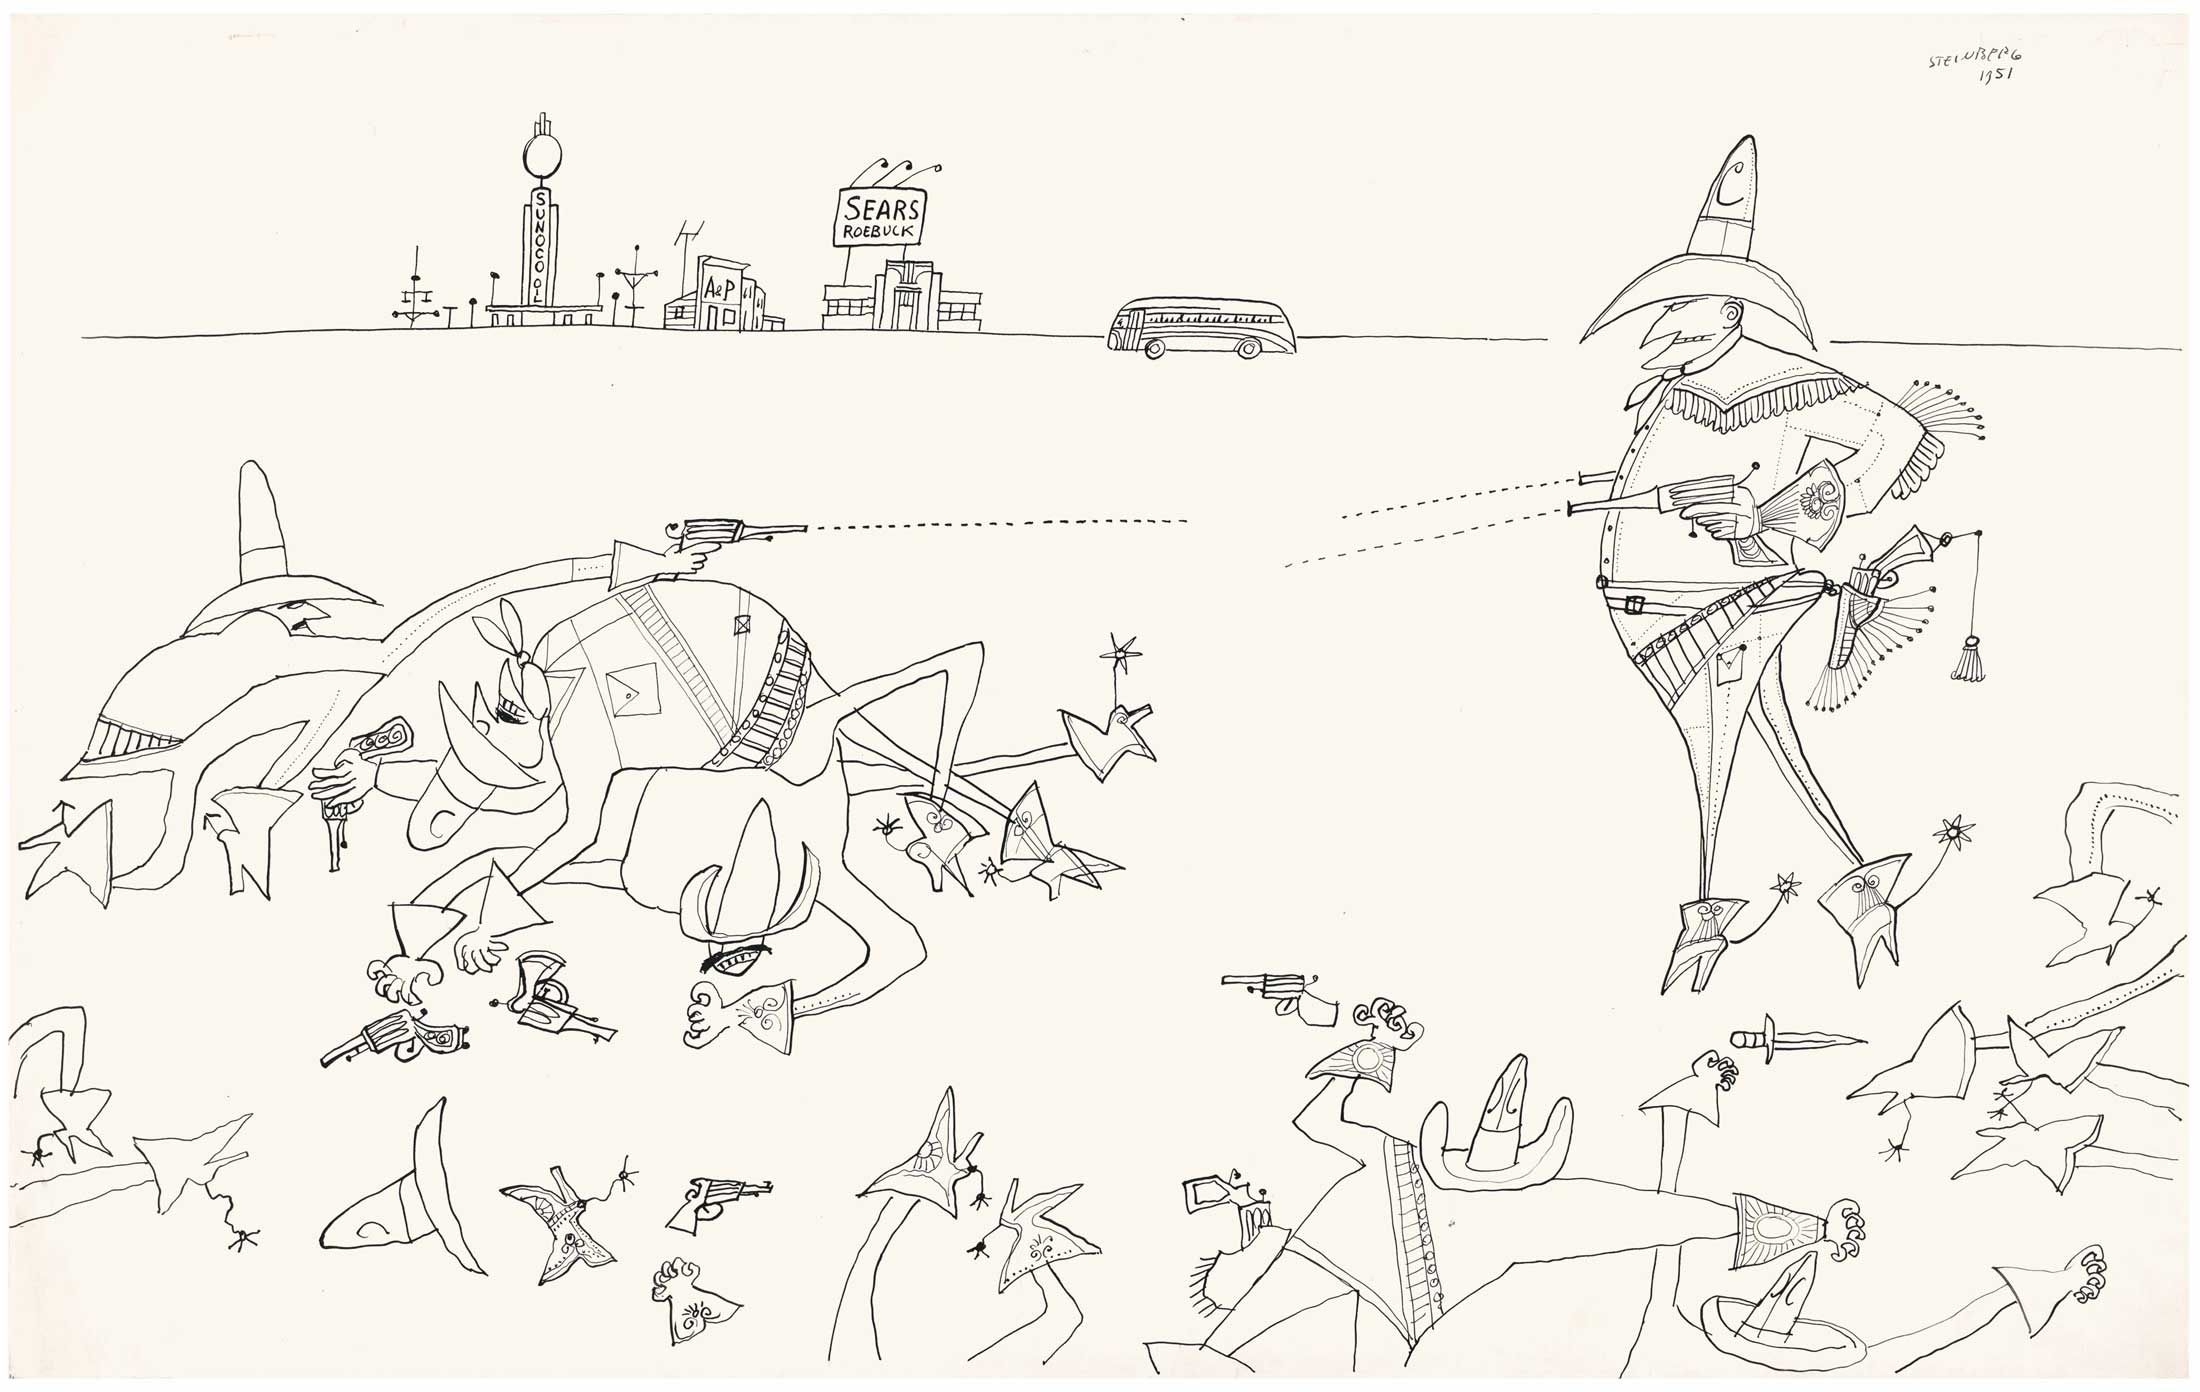 <em>Cowboys</em>, 1951. Ink on paper, 14 x 22 in. The Art Institute of Chicago; Gift of The Saul Steinberg Foundation.